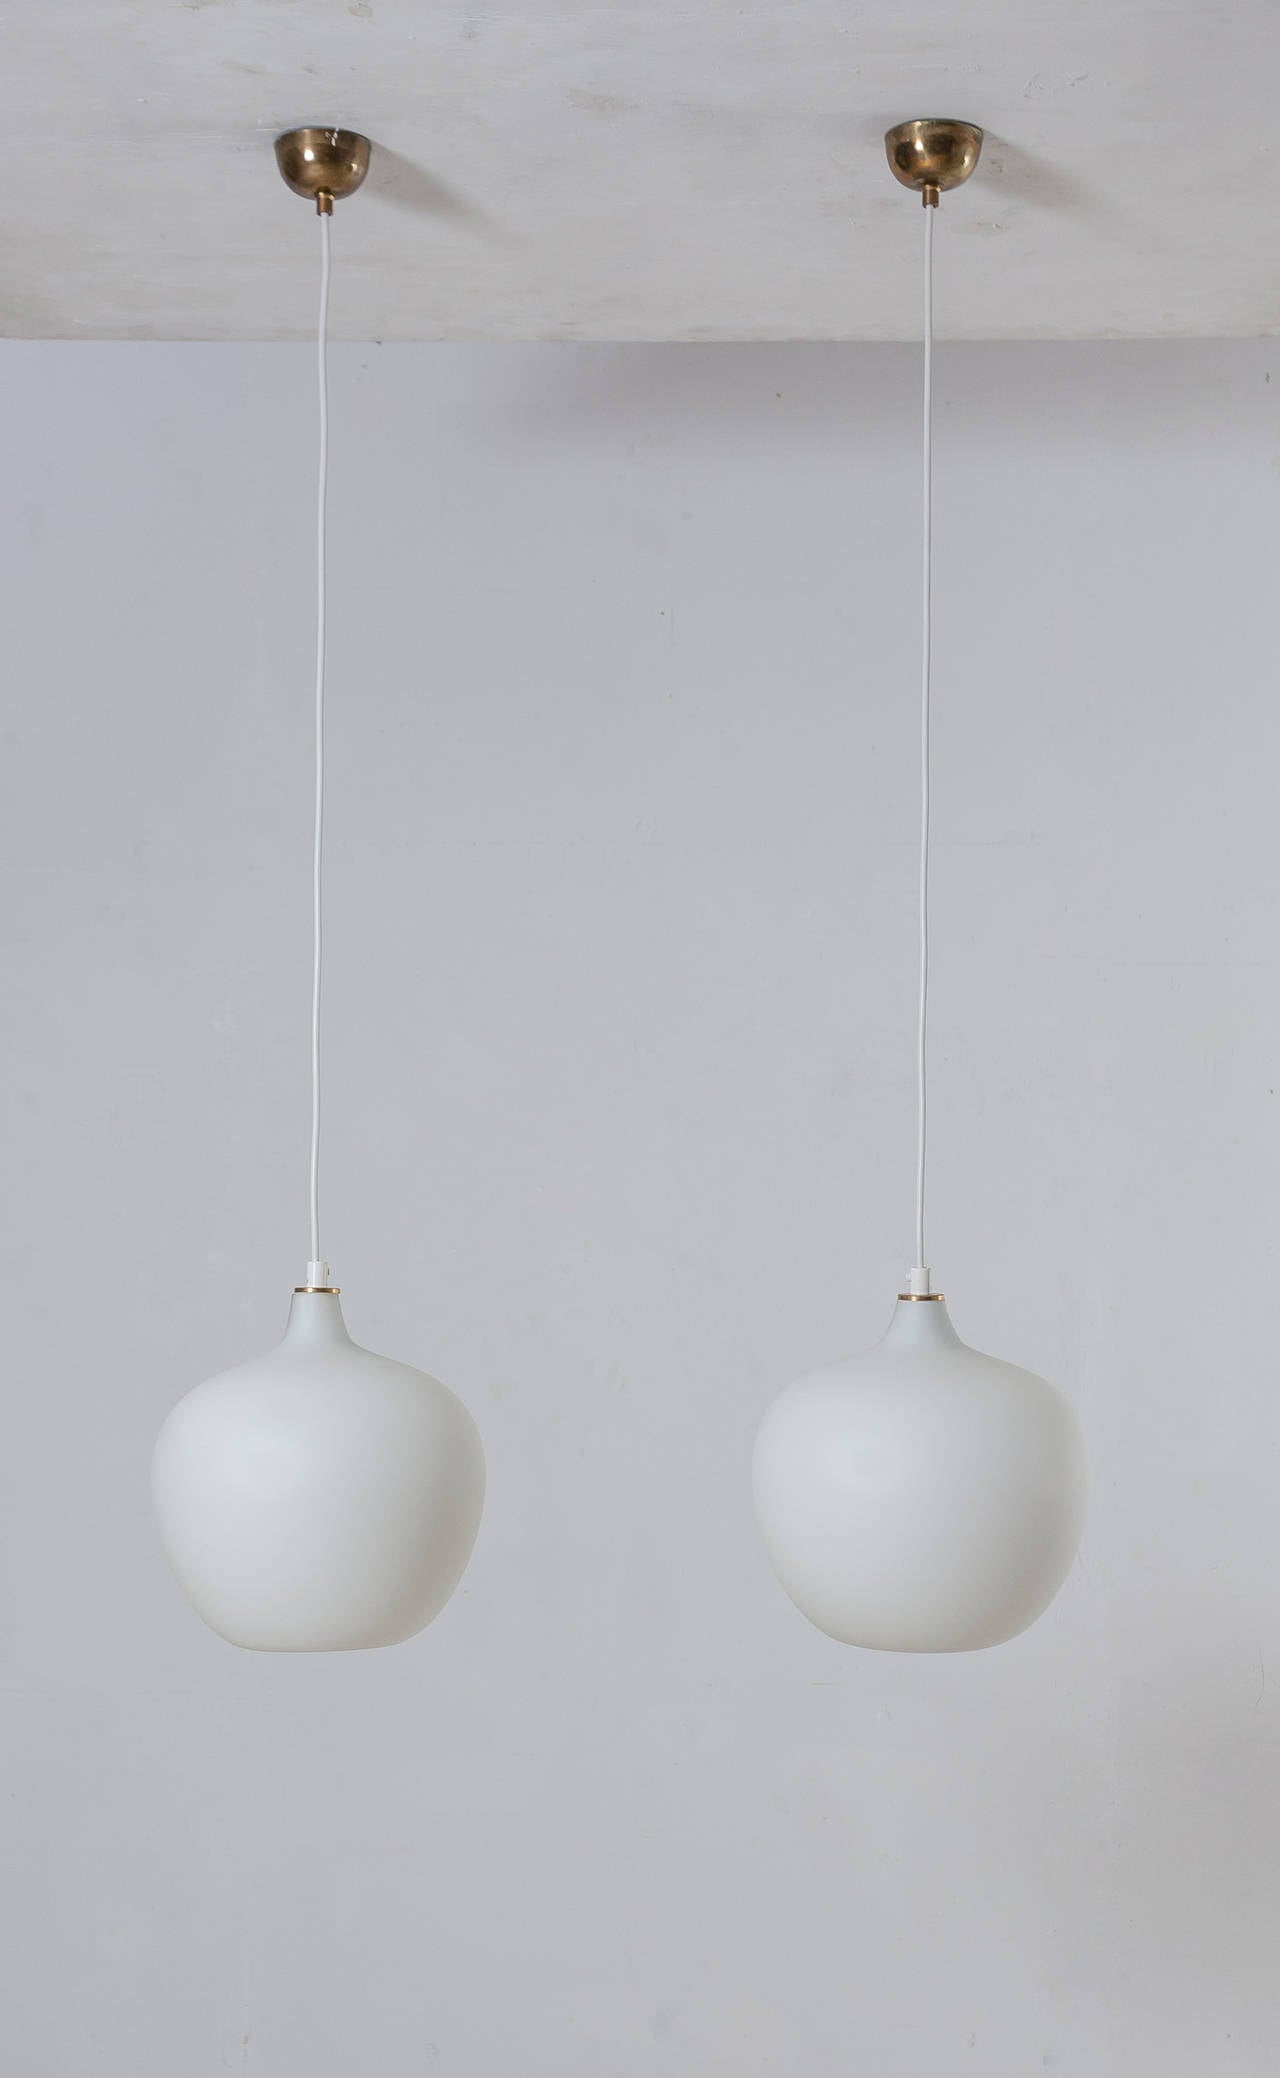 Pair of Tapio Wirkkala Pendants Model 51129 for Idman, Finland, 1958 In Excellent Condition For Sale In Maastricht, NL